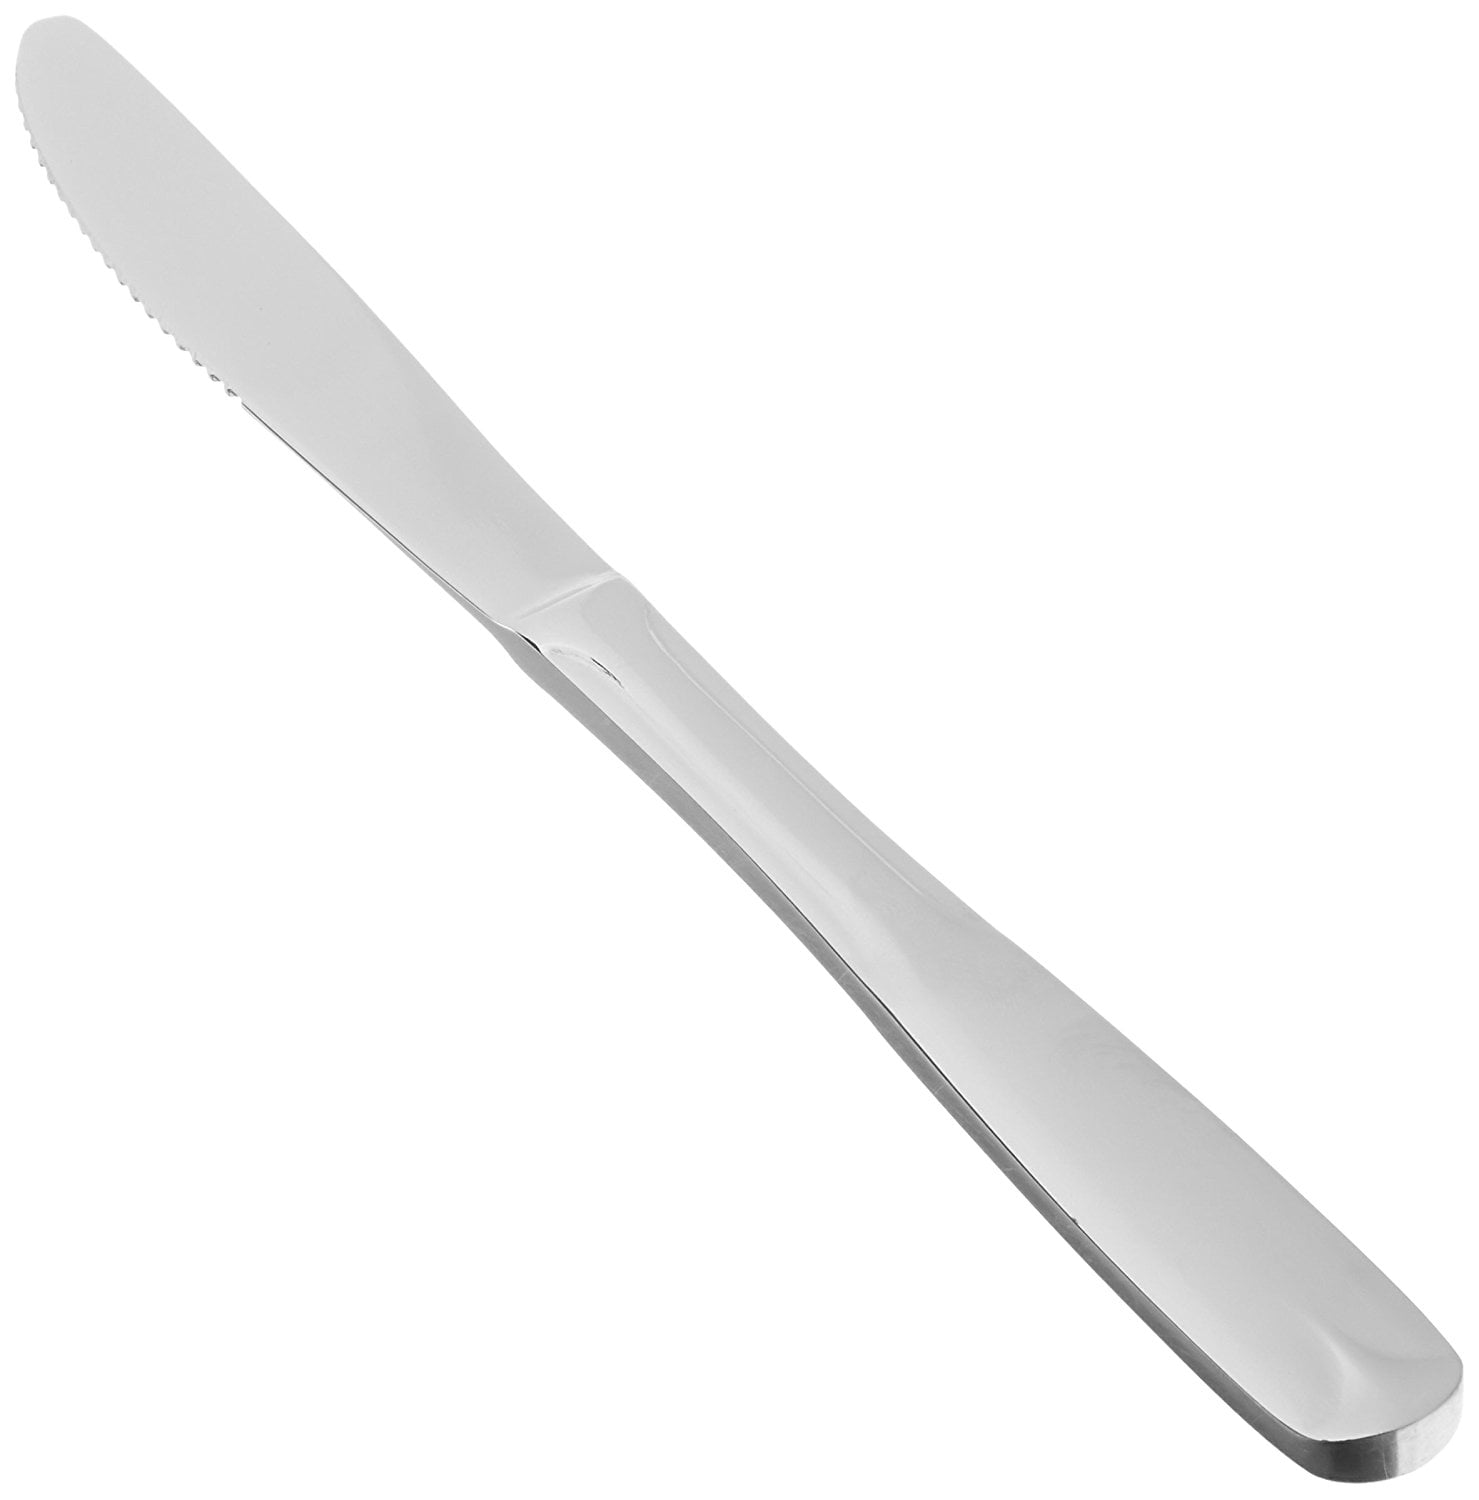 Choice Dominion 8 3/8 Stainless Steel Dinner Knife - 12/Case